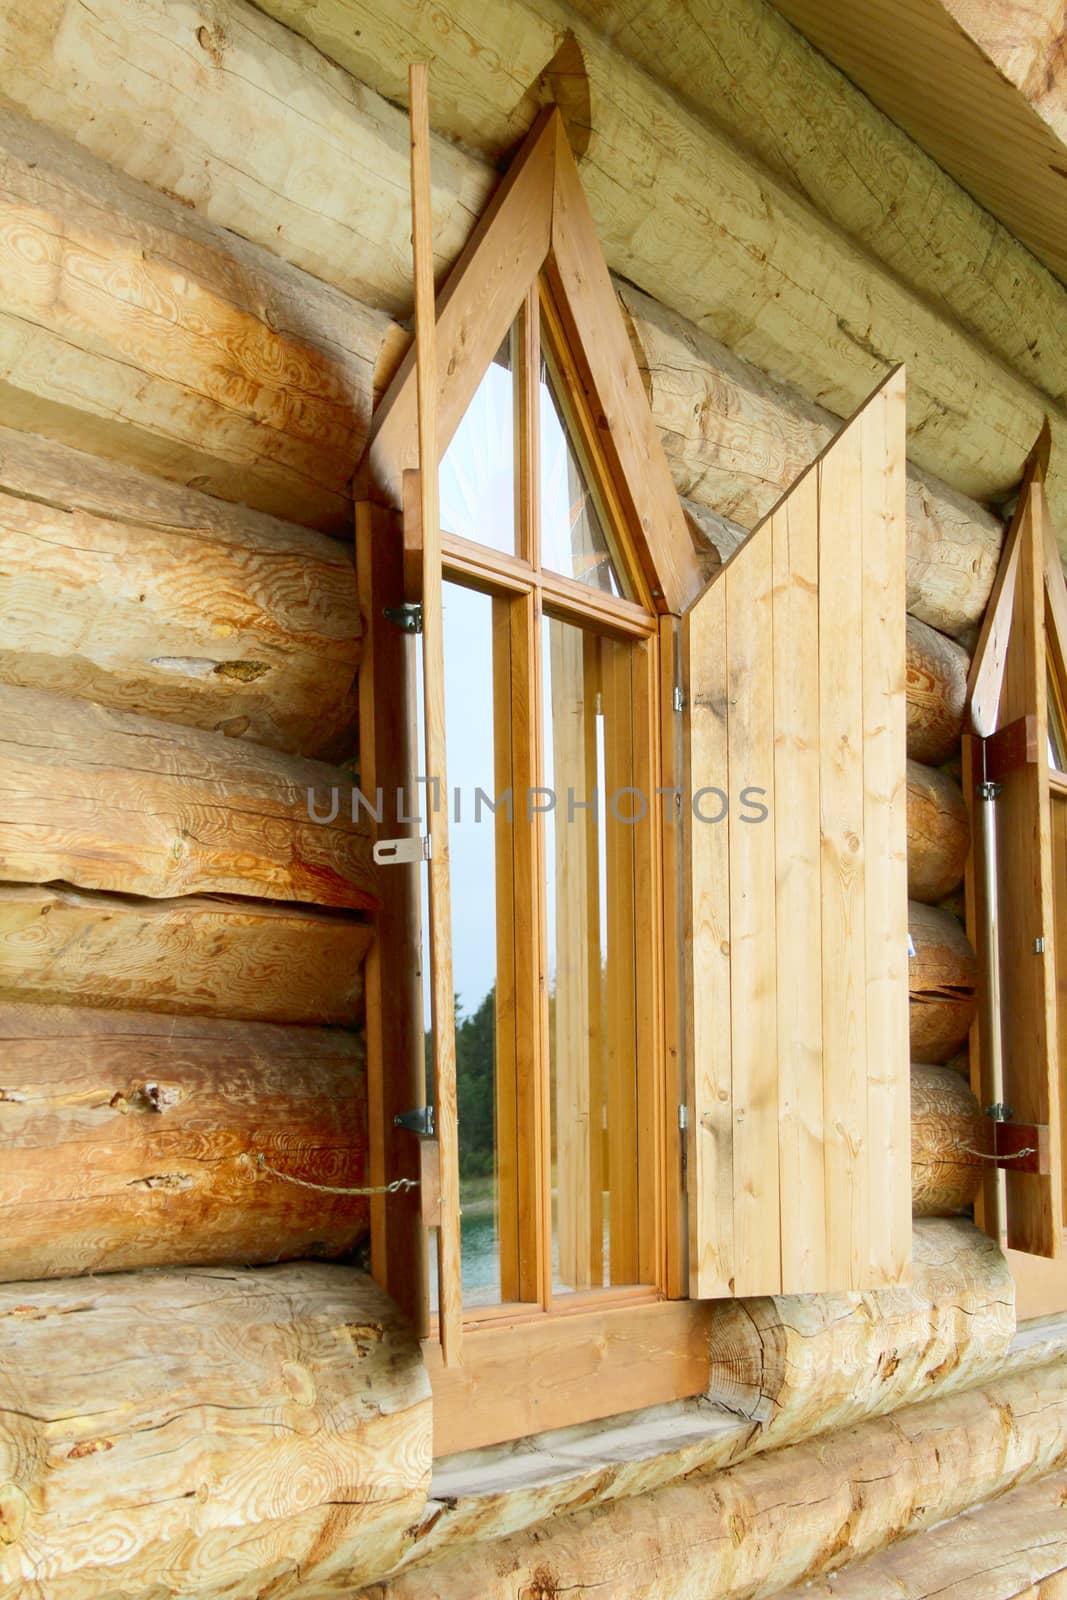 Old log chapel with an open window